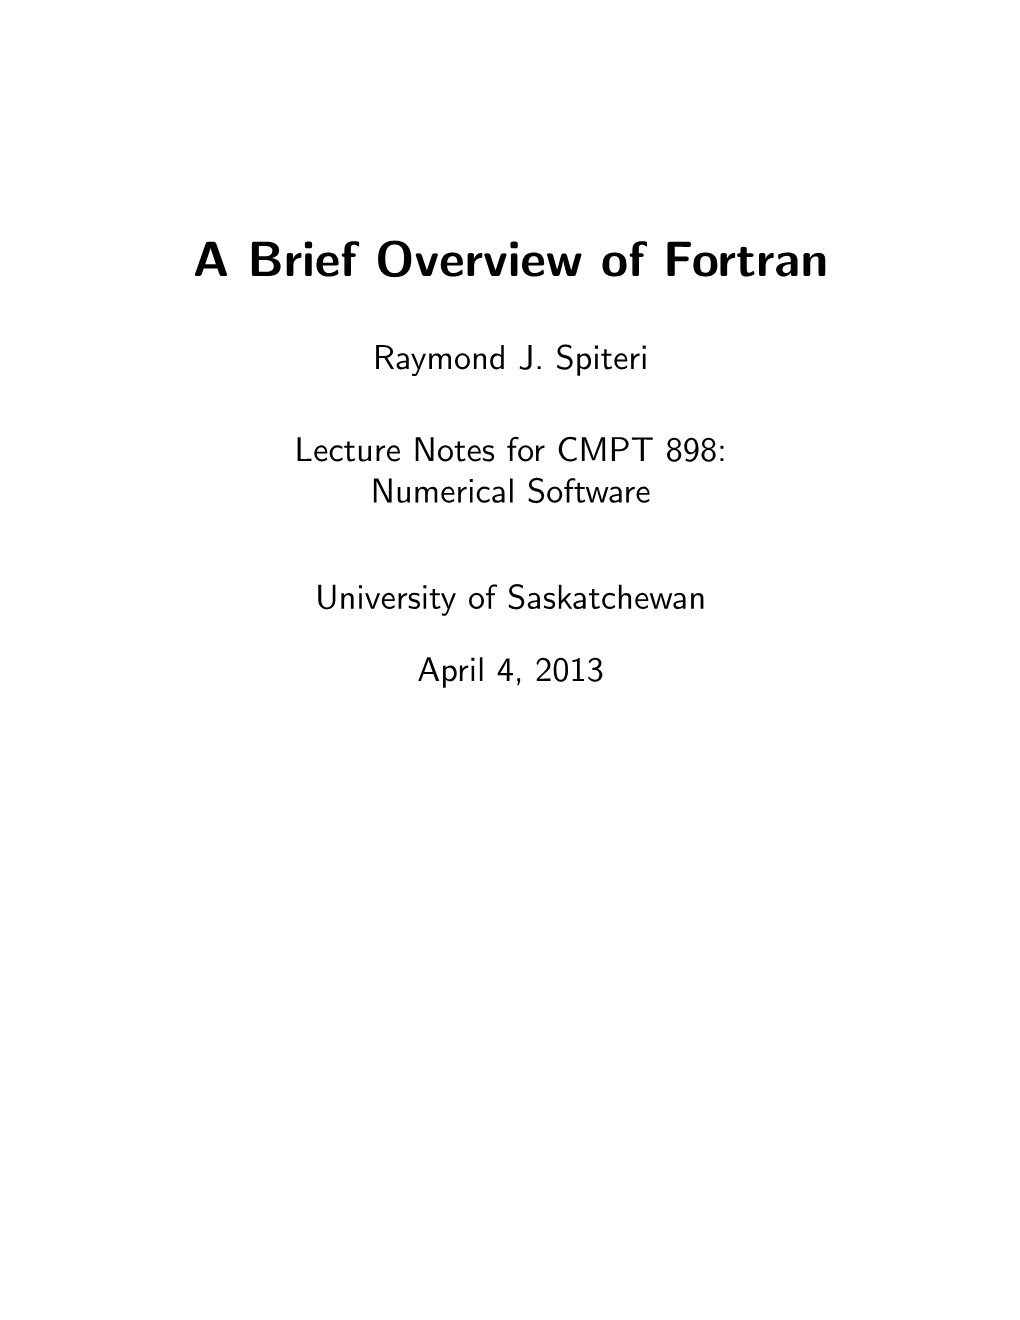 A Brief Overview of Fortran